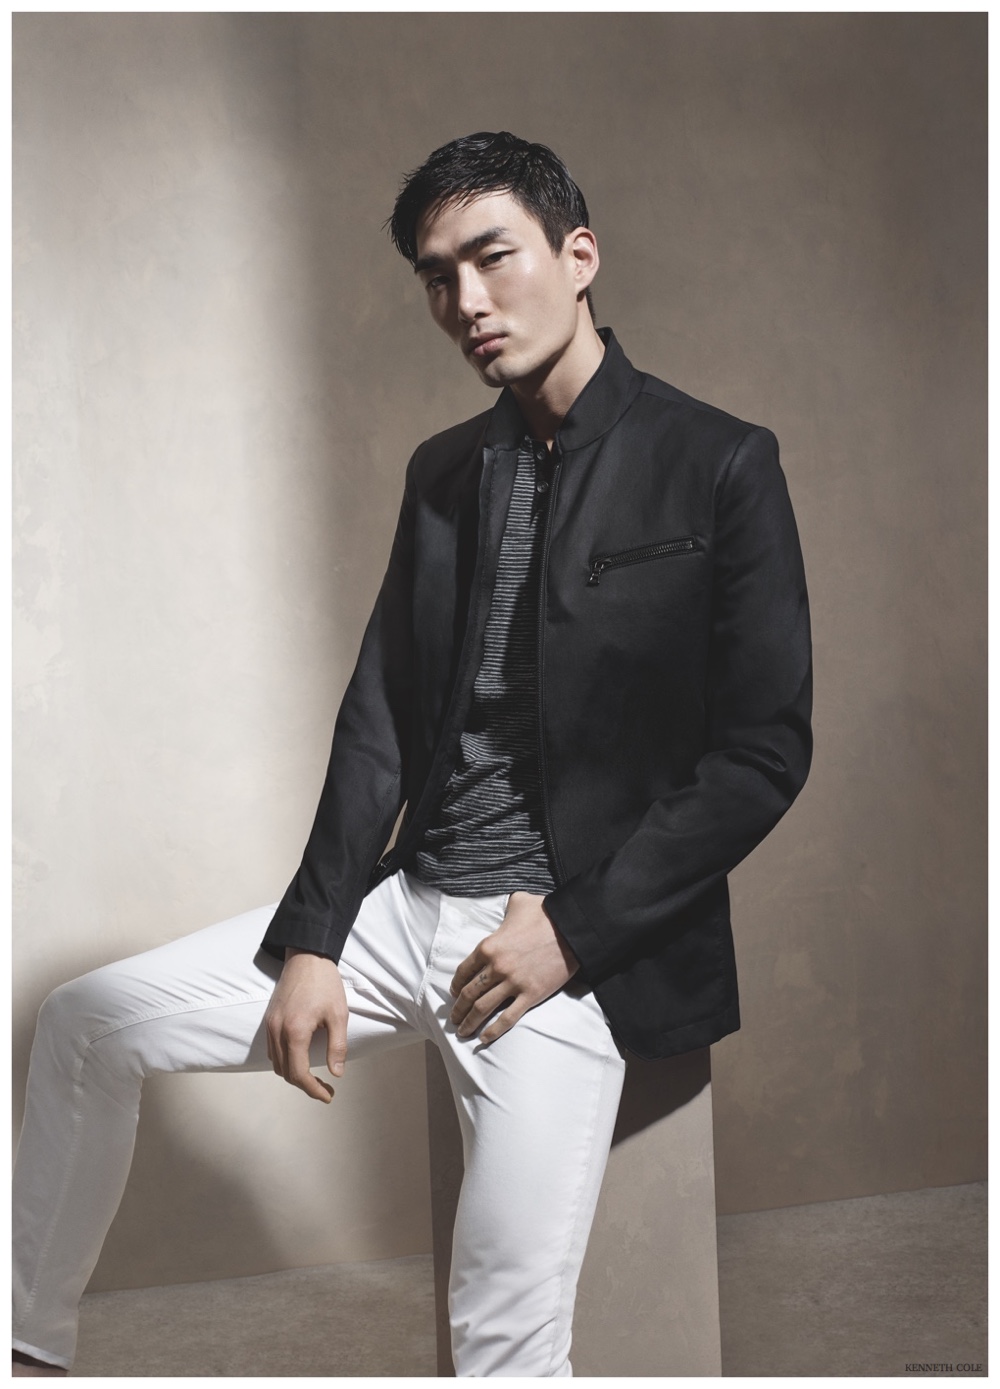 Kenneth Cole Spring/Summer 2015 Menswear Campaign